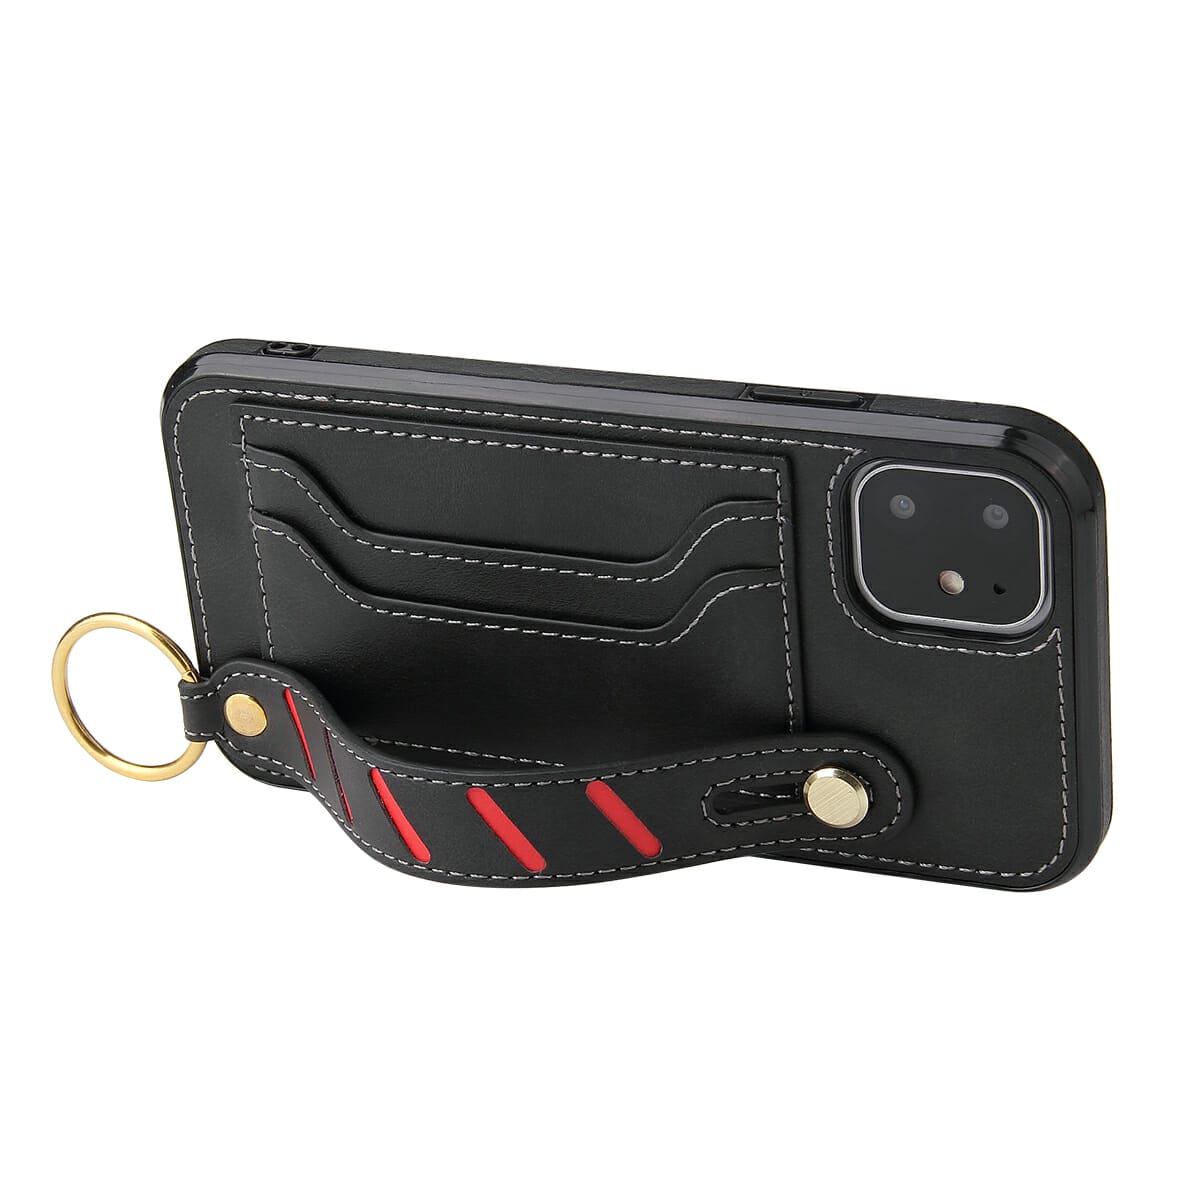 Leather Card Holder Case With Wristband For iPhone 5